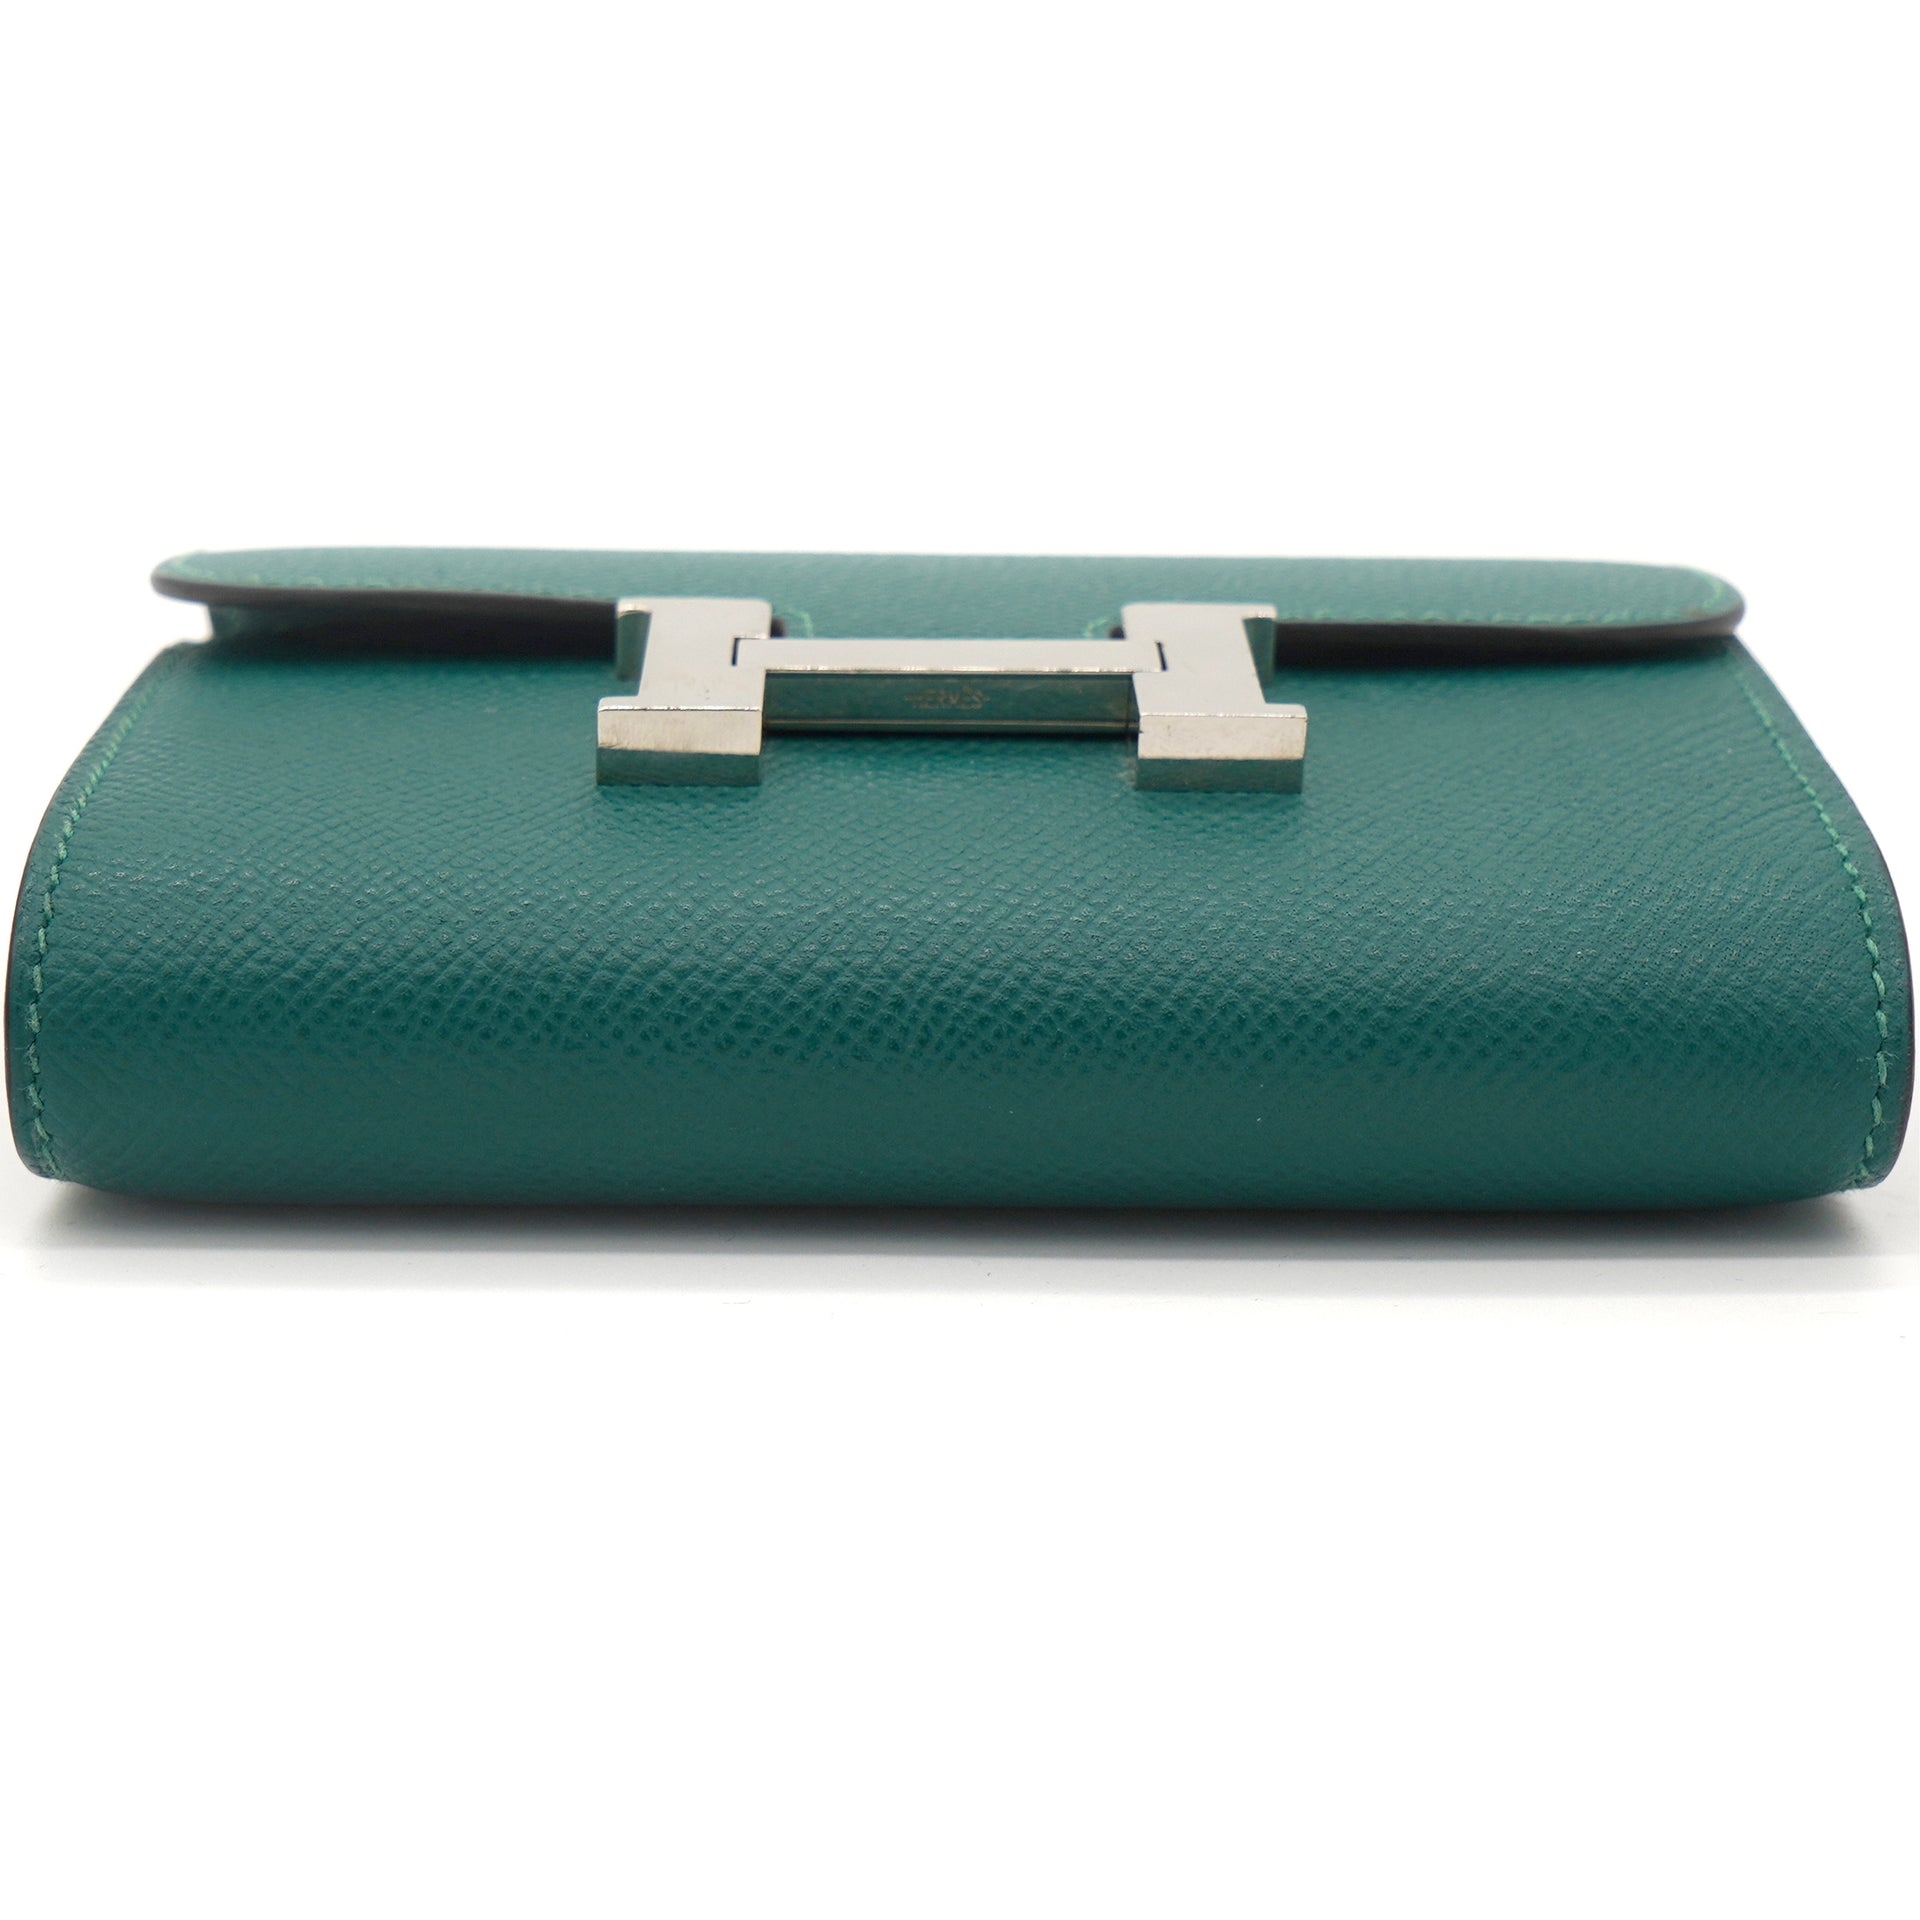 Green Epsom Leather Constance Compact Wallet